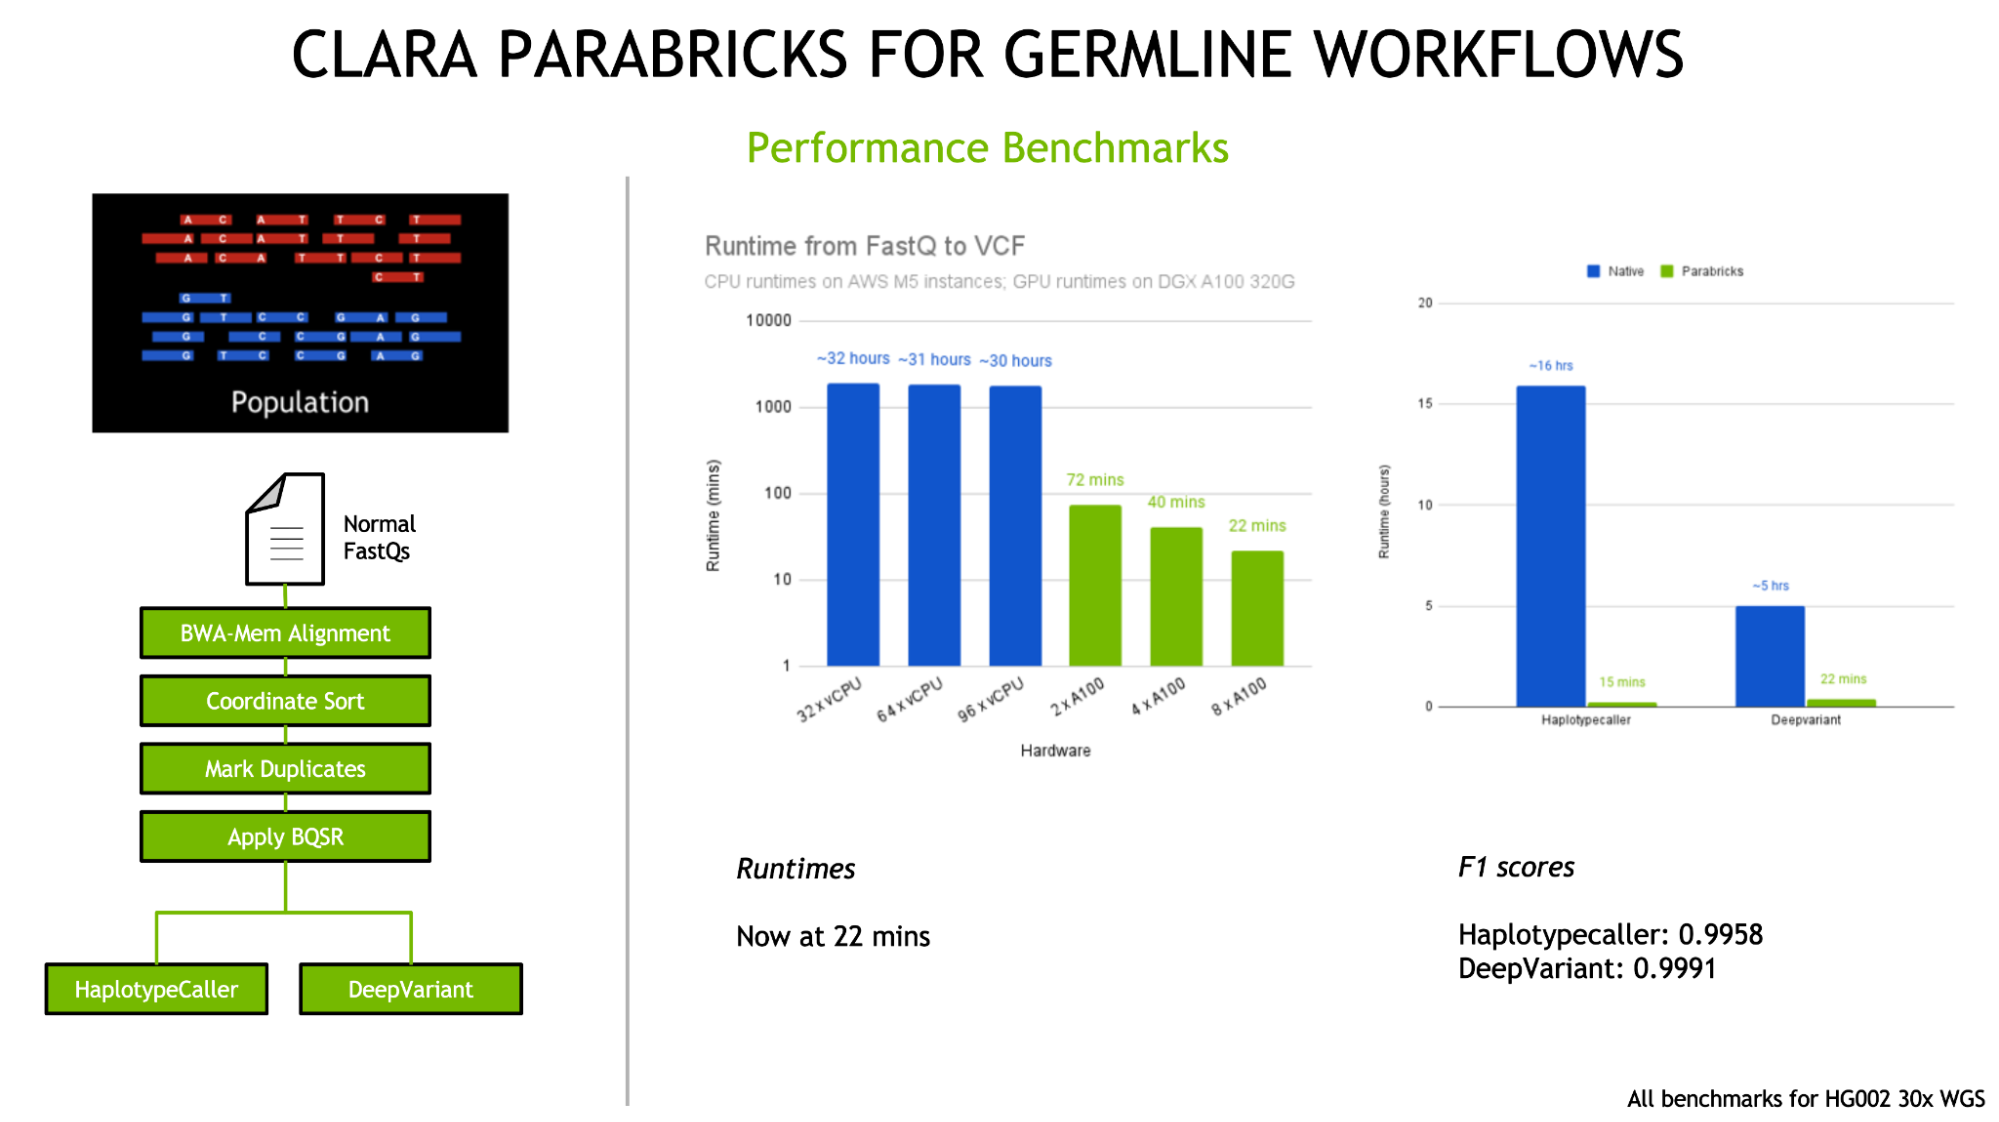 Shows the workflow of Parabricks for gremlin workflows and performance benchmarks showing runtime of 22 minutes.